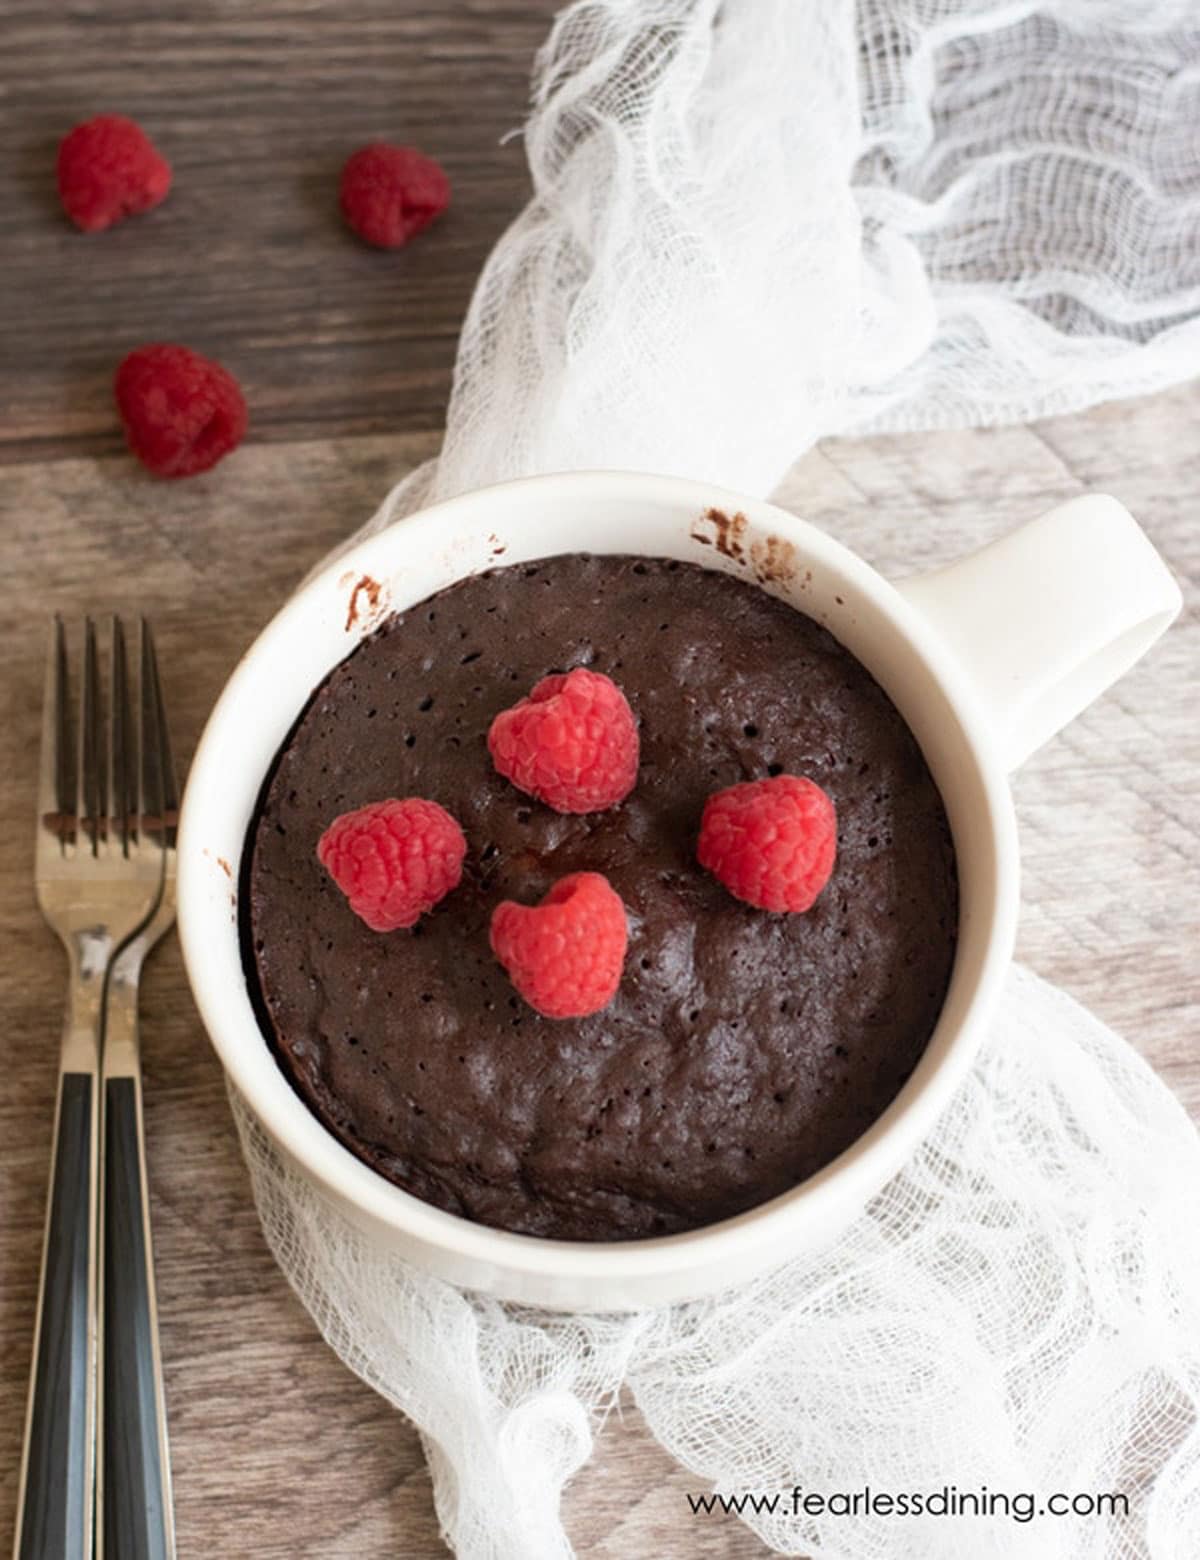 The top view of a chocolate mug cake ready to eat.